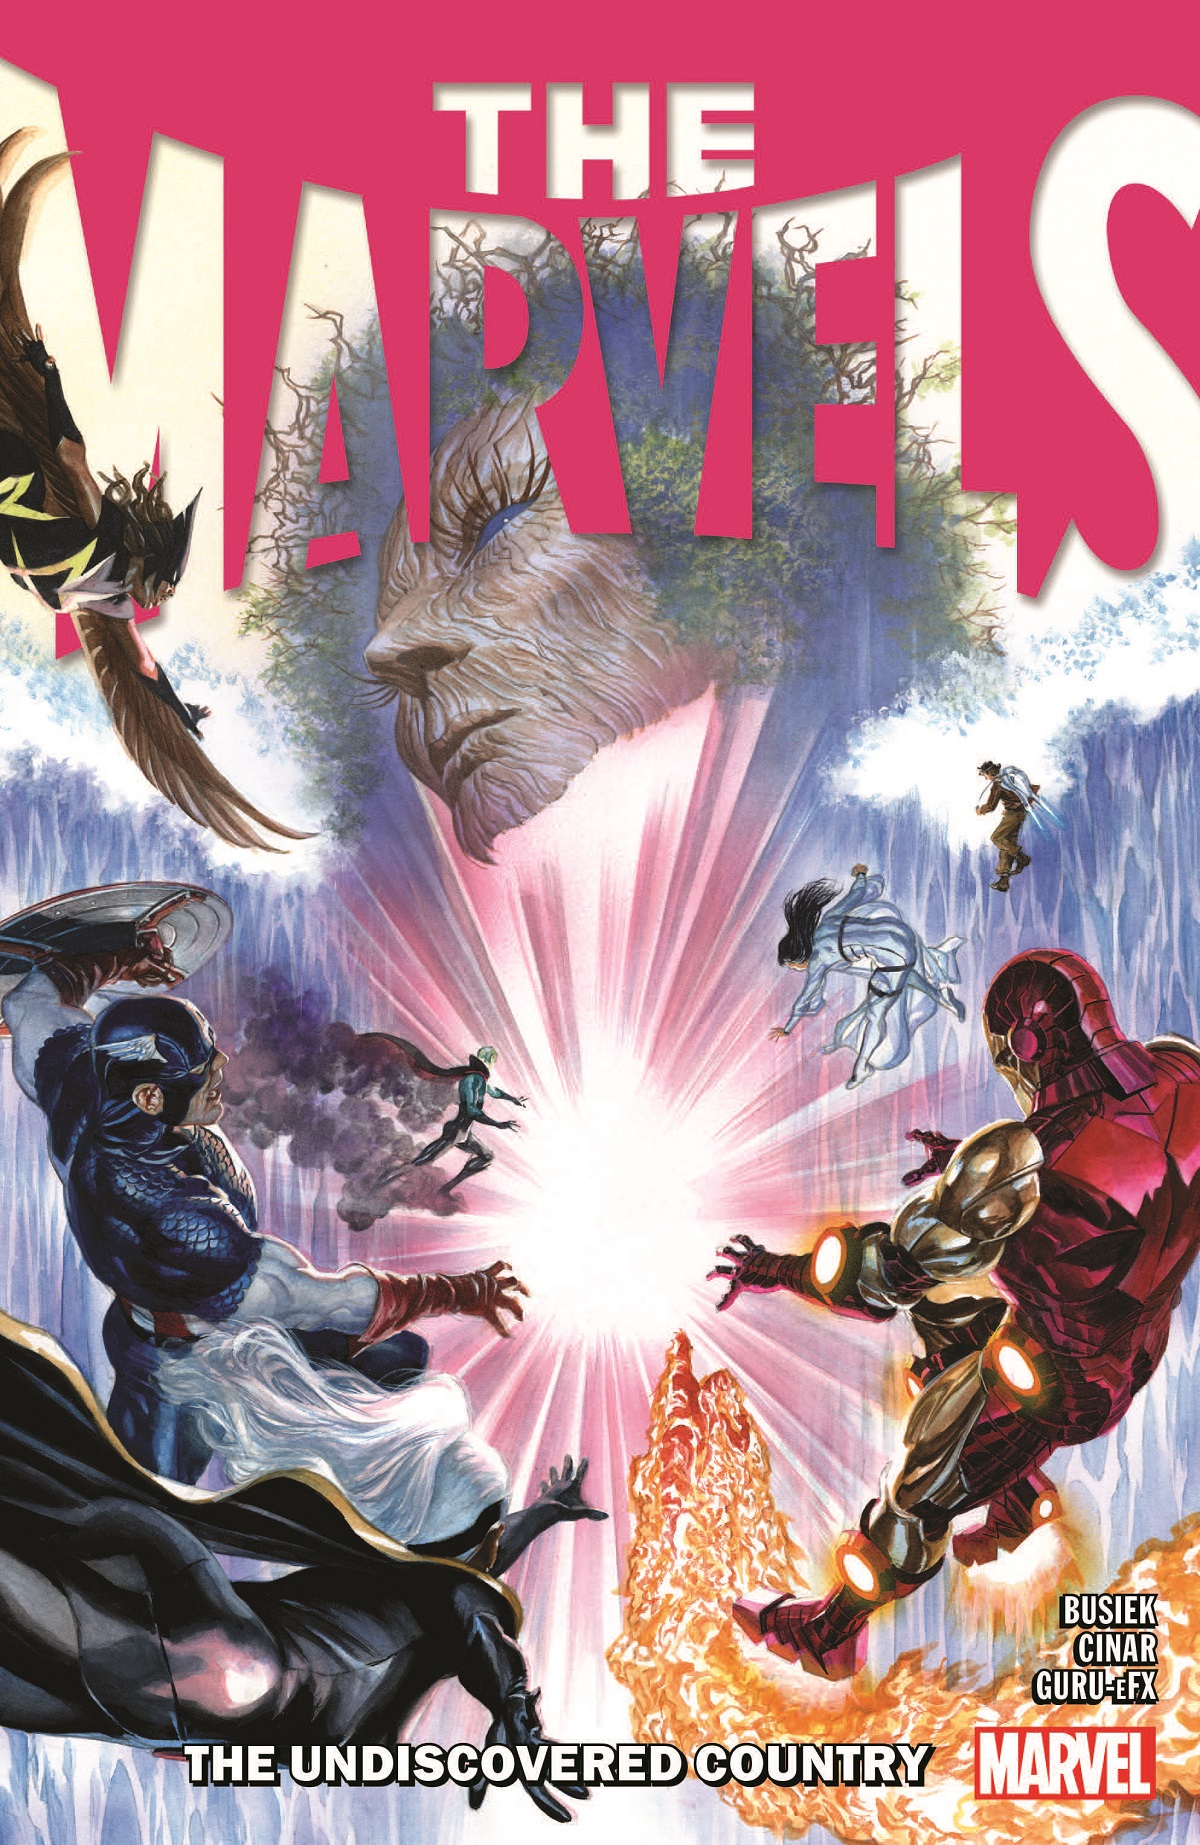 The Marvels Vol. 2: The Undiscovered Country (Trade Paperback)